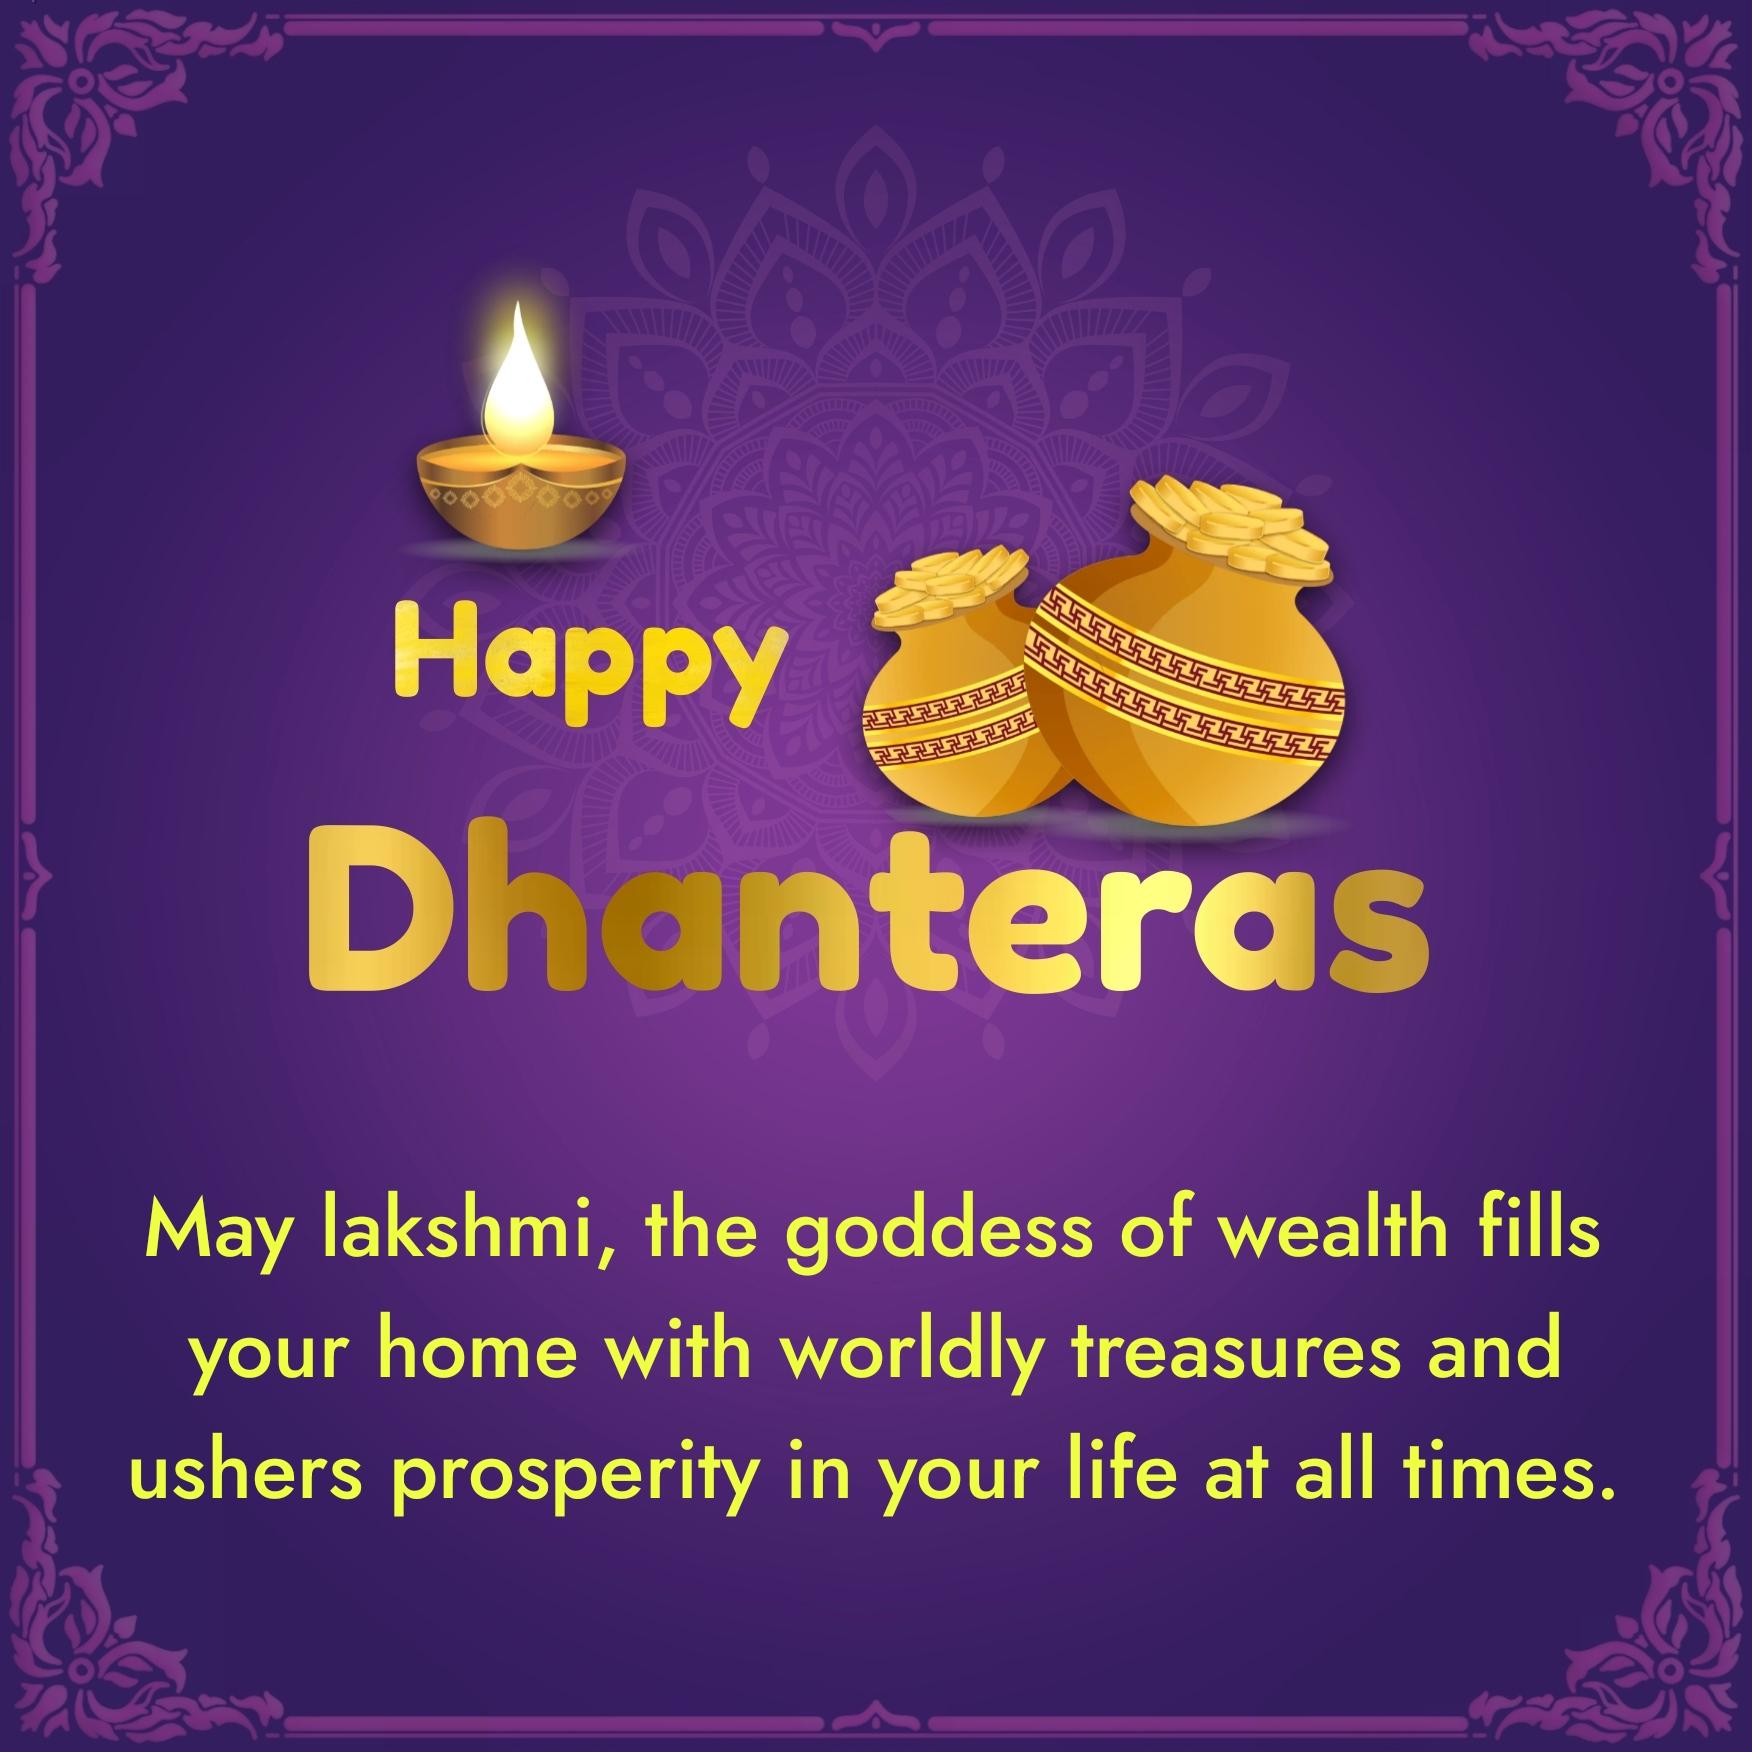 May lakshmi the goddess of wealth fills your home